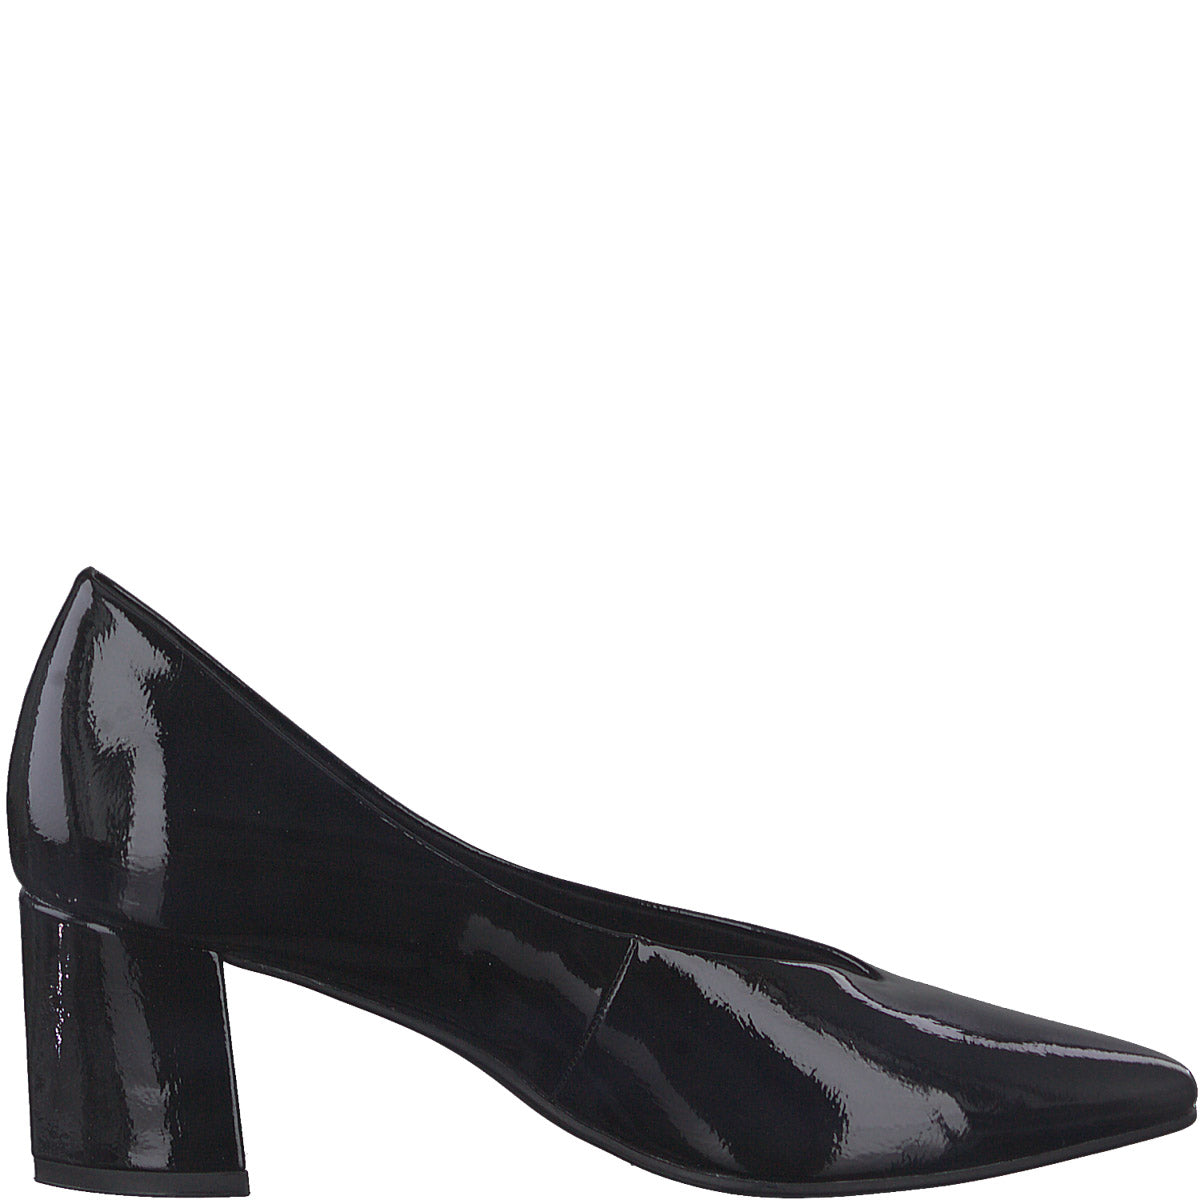 Fancy Glossy Pumps in Black Patent